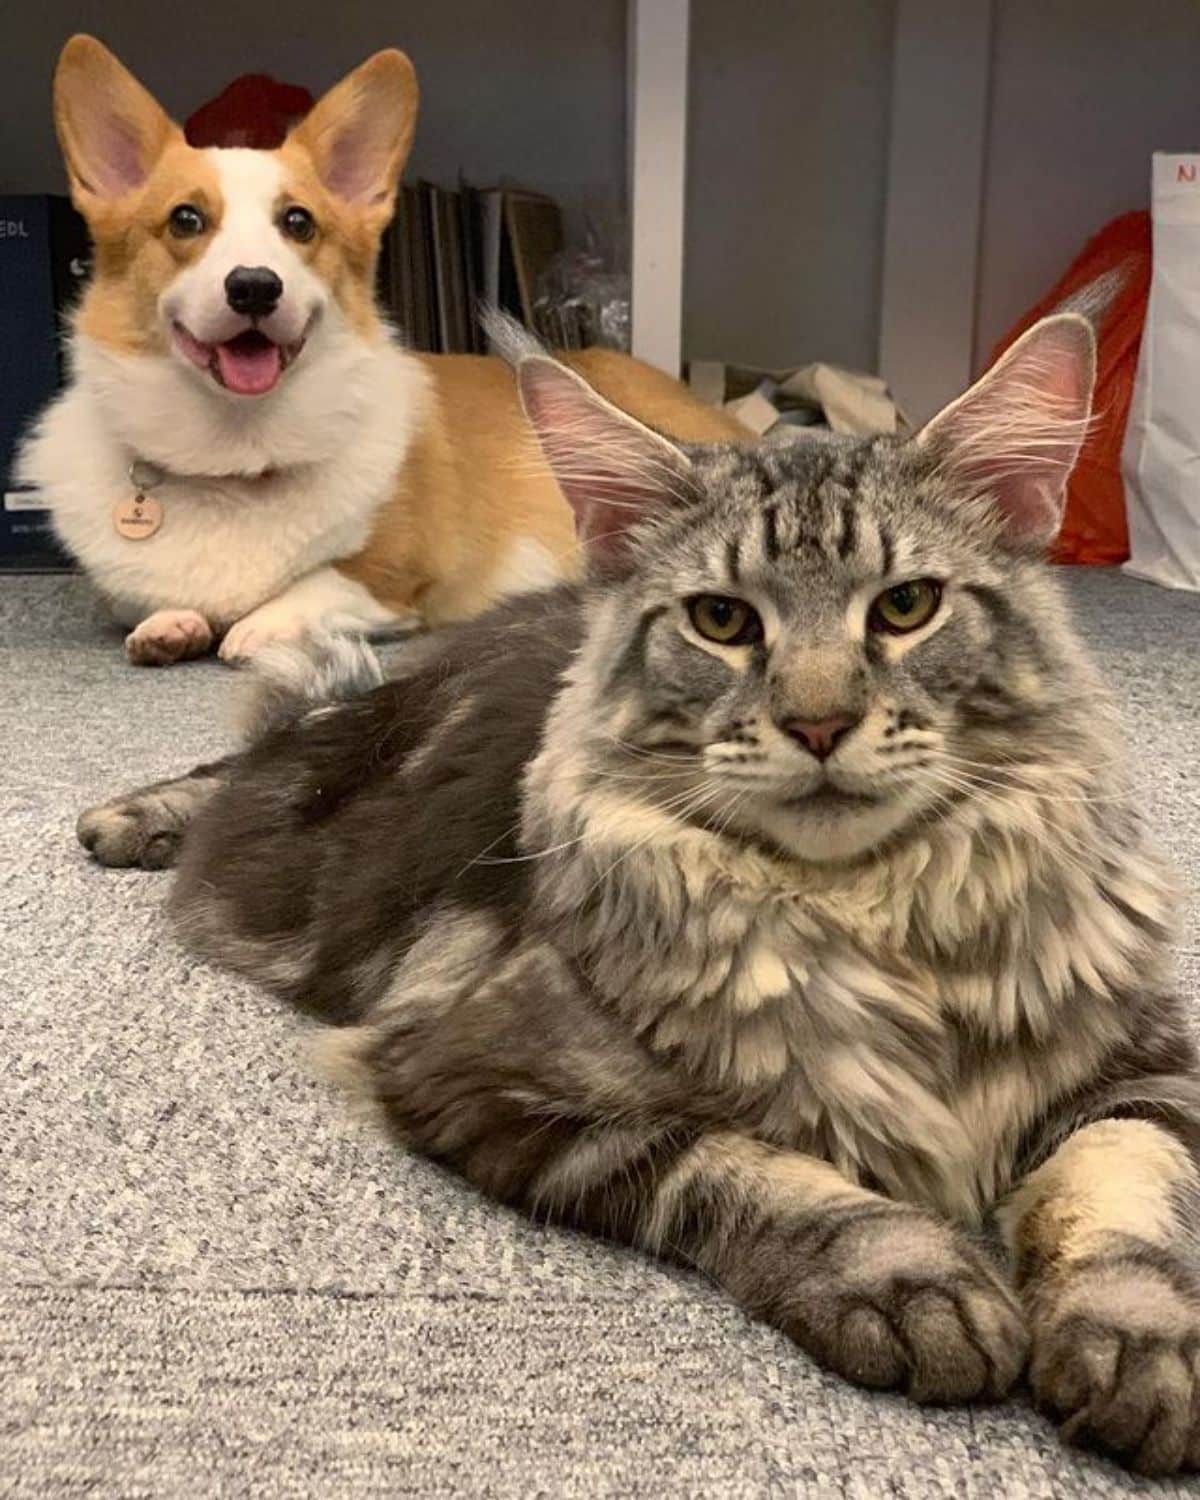 A silver maine coon lying on a carpet infront of Corgi.